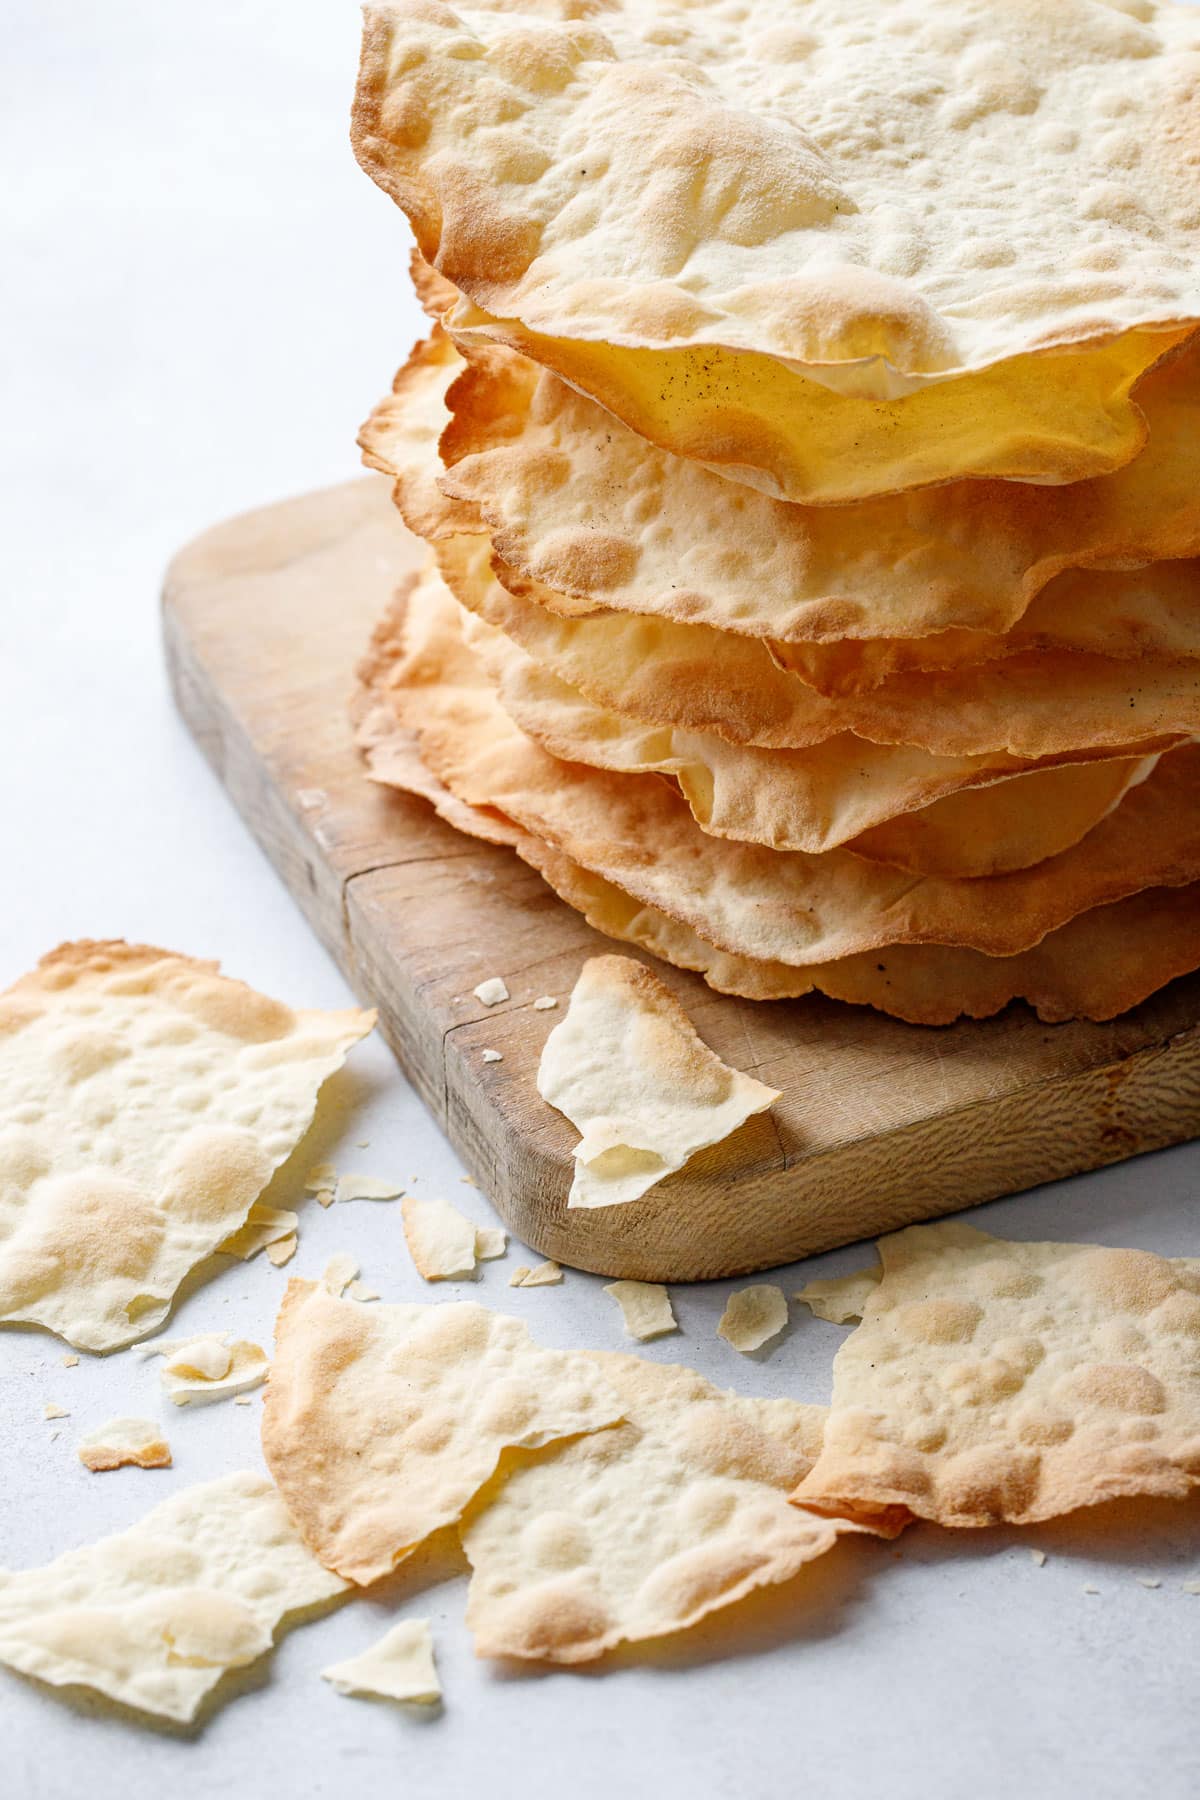 Stack of Sourdough Semolina Parchment Crackers on a board, with broken pieces of cracker scattered about showing just how thin and crispy the texture is.